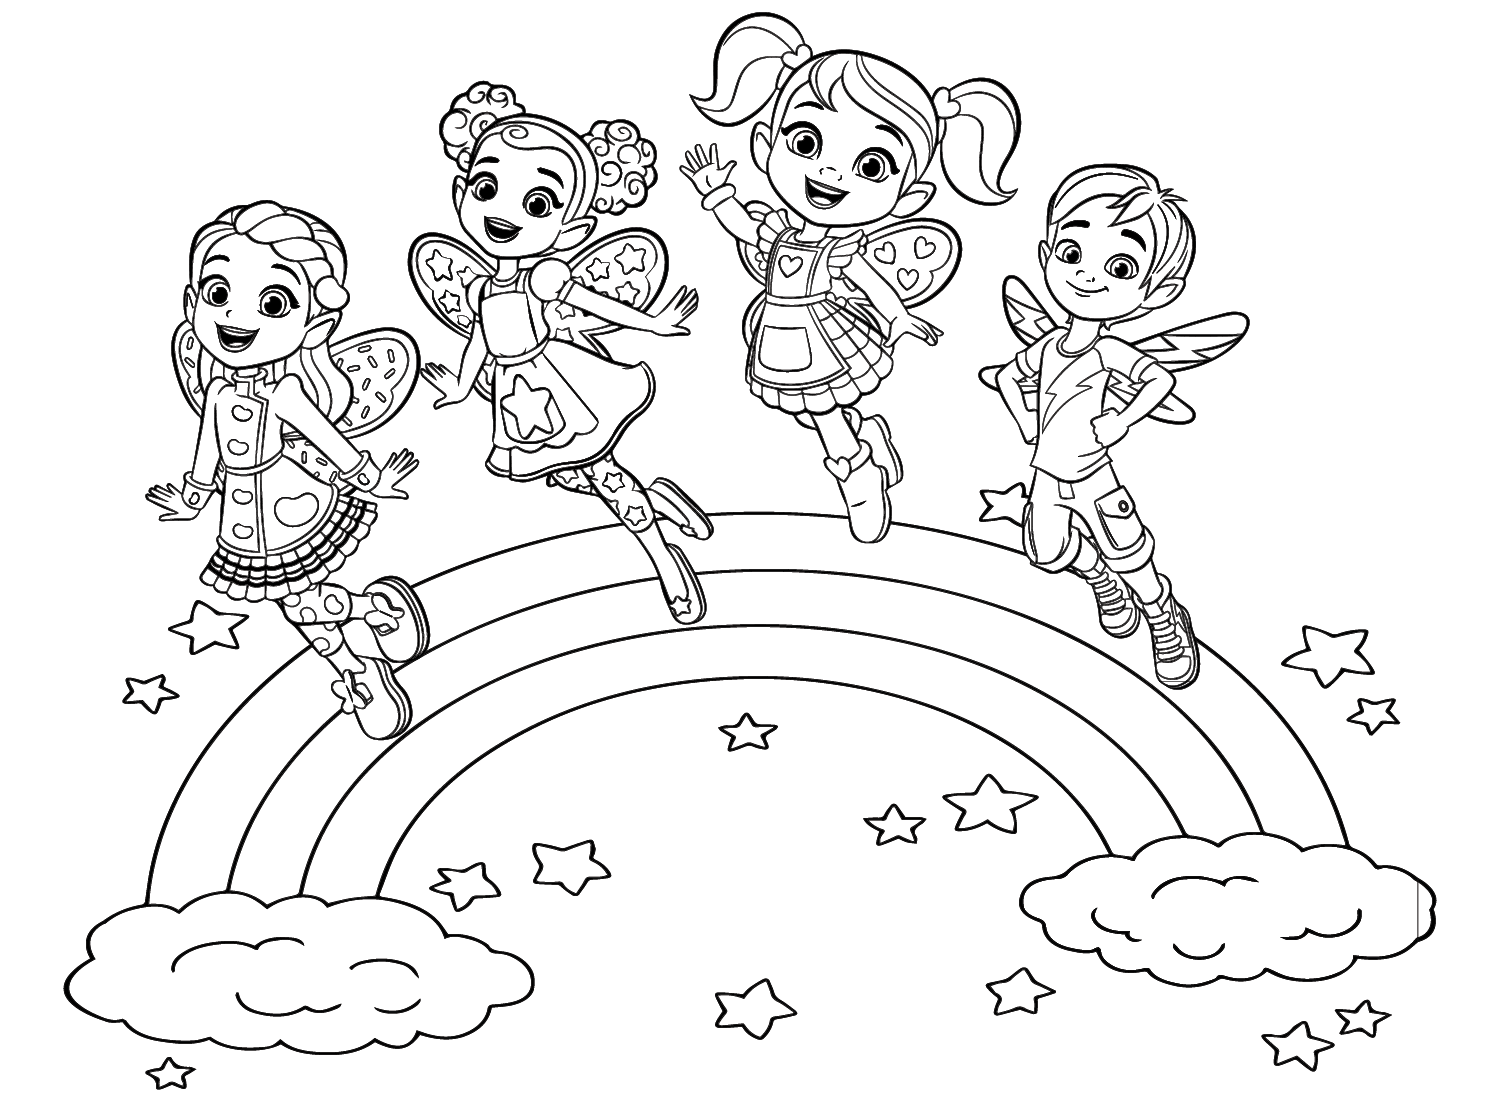 Images Butterbean’s Cafe Coloring Page - Free Printable Coloring Pages